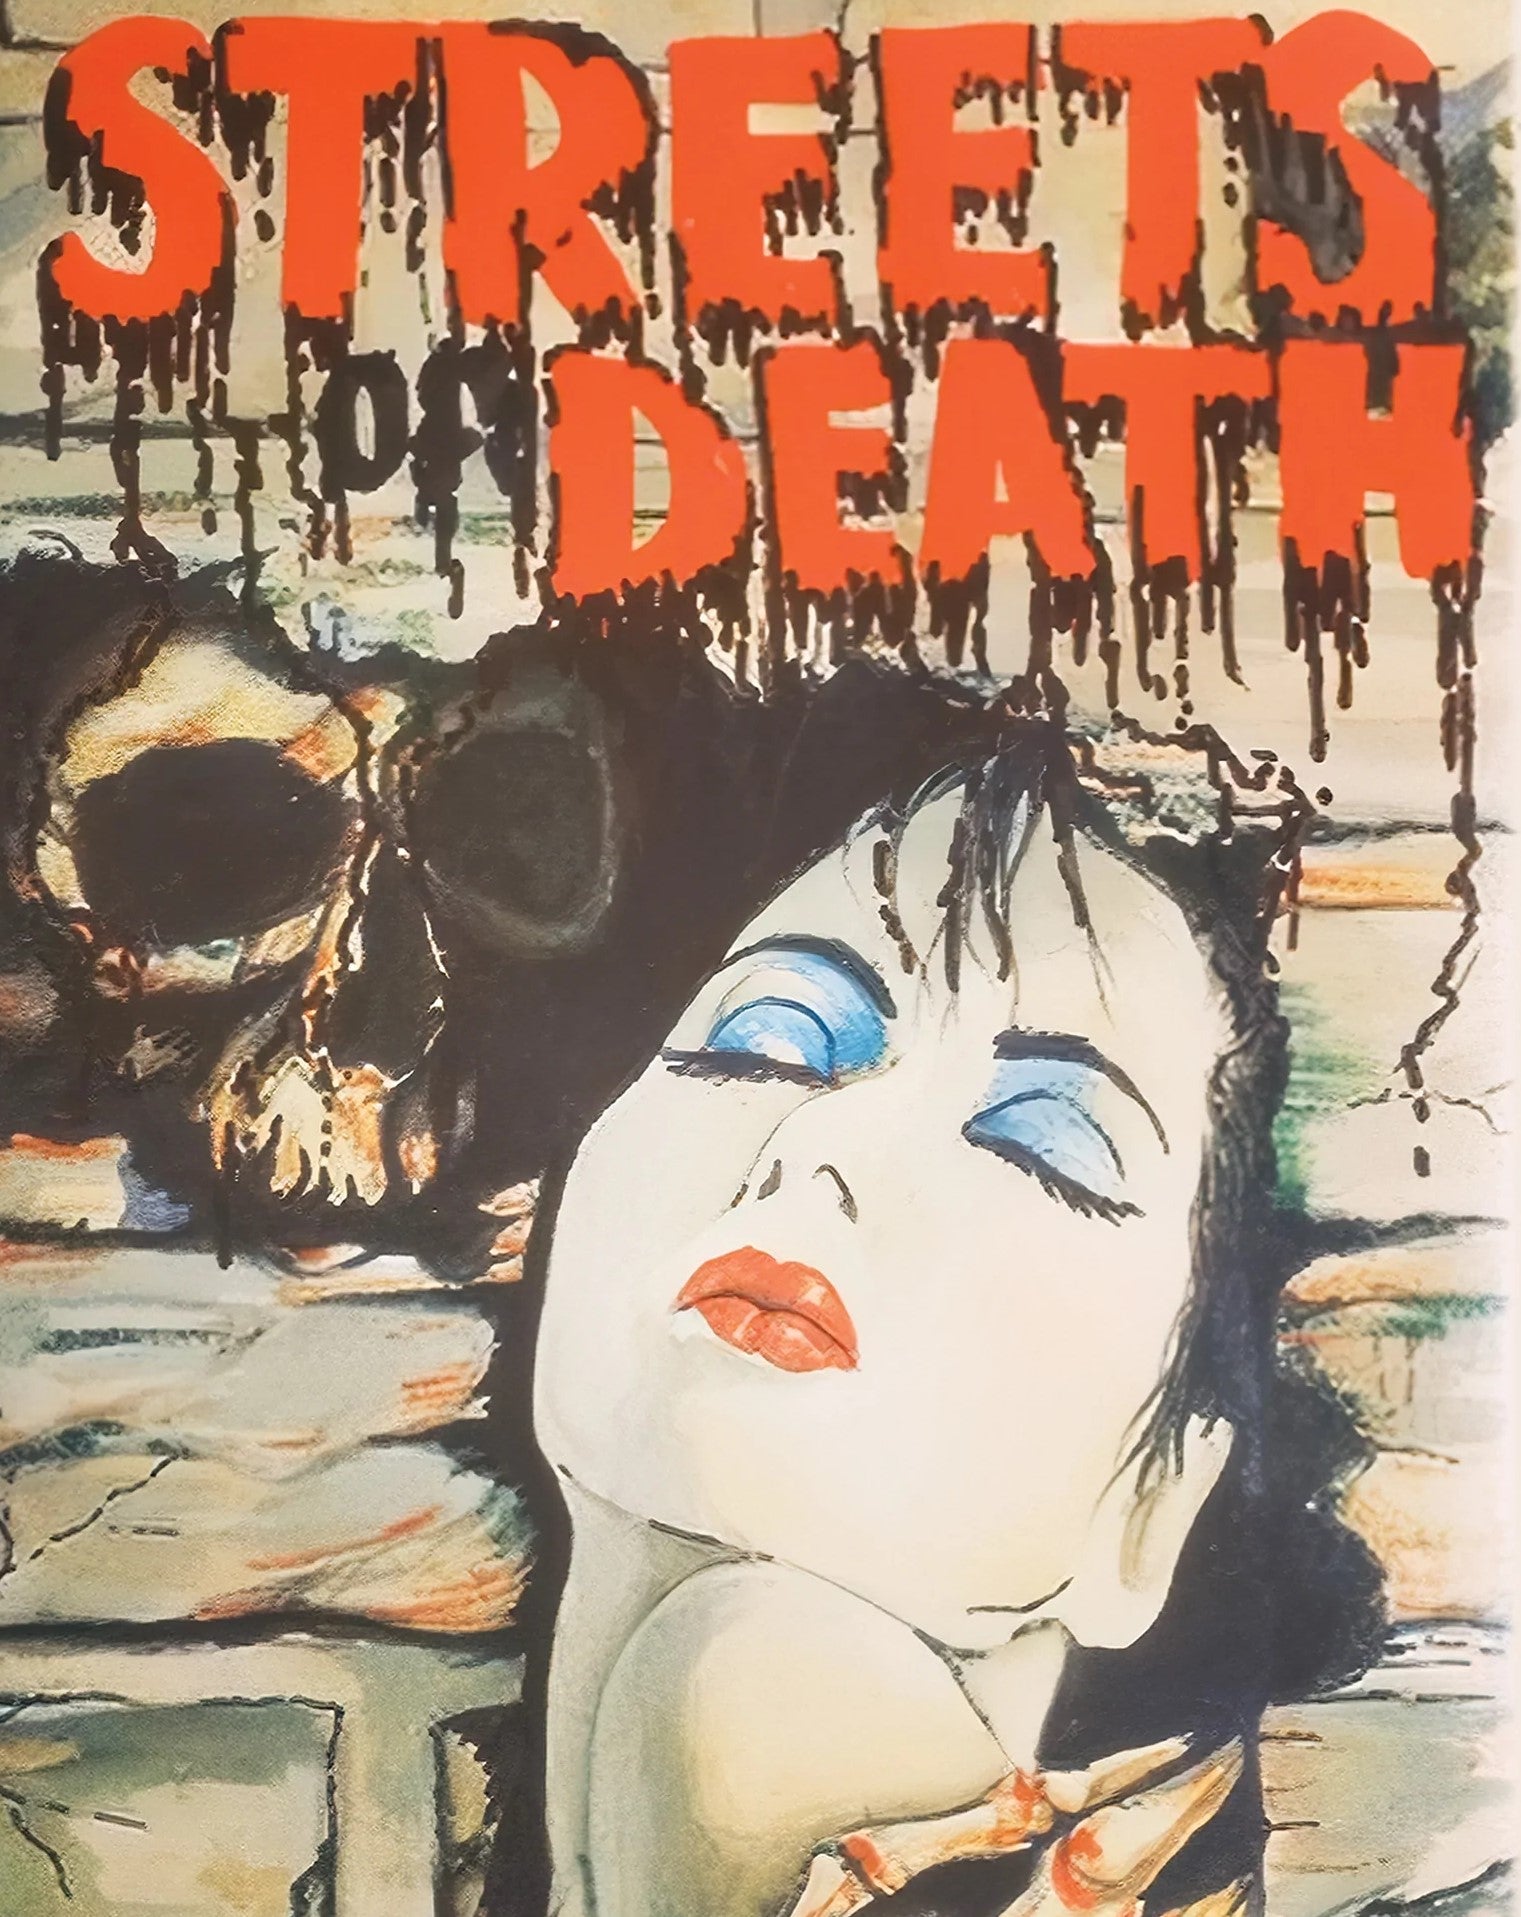 STREETS OF DEATH (LIMITED EDITION) BLU-RAY